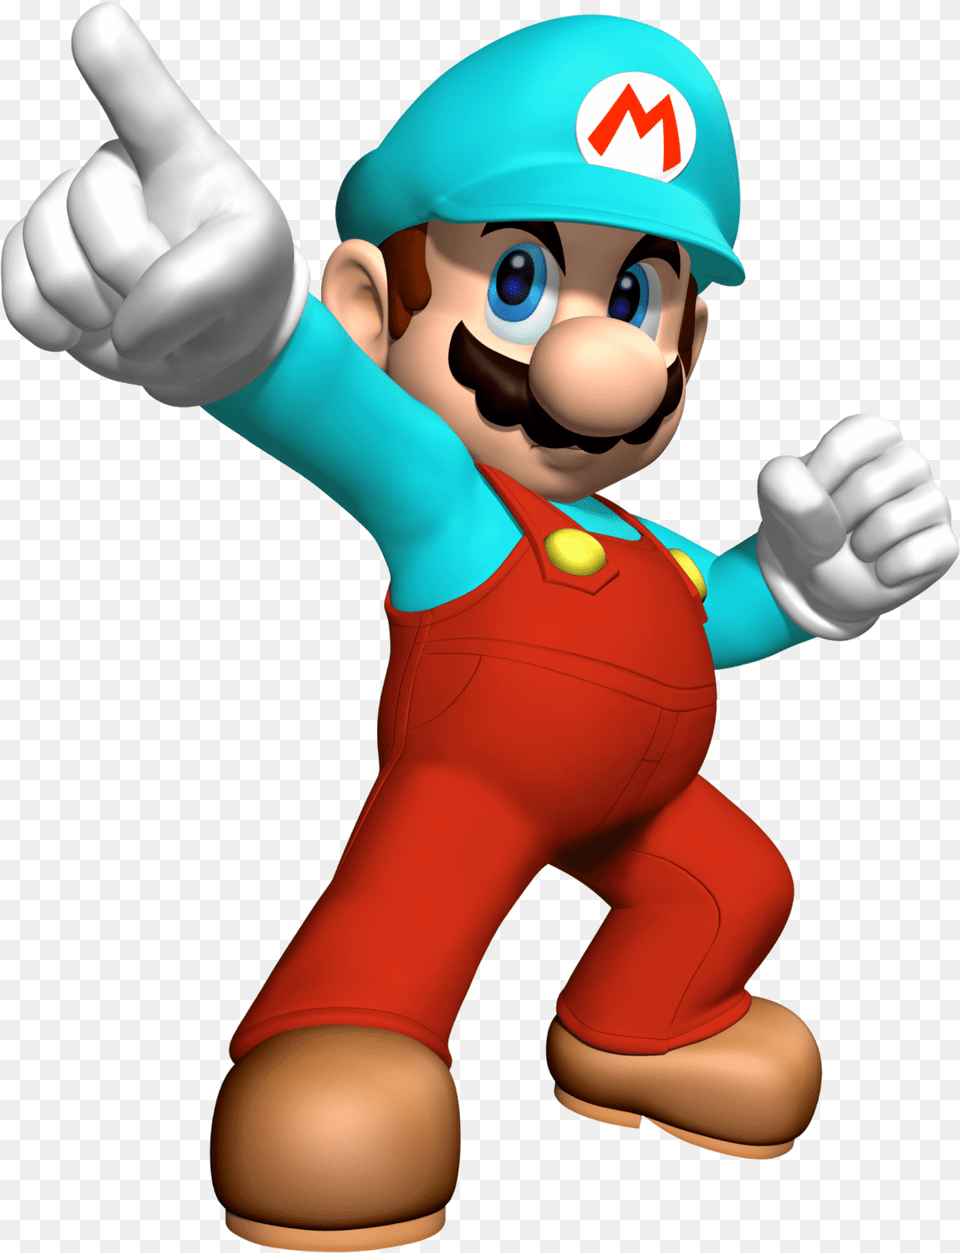 Download Mario Bros 3d Uokplrs Mario With Fire Flower, Body Part, Finger, Hand, Person Png Image